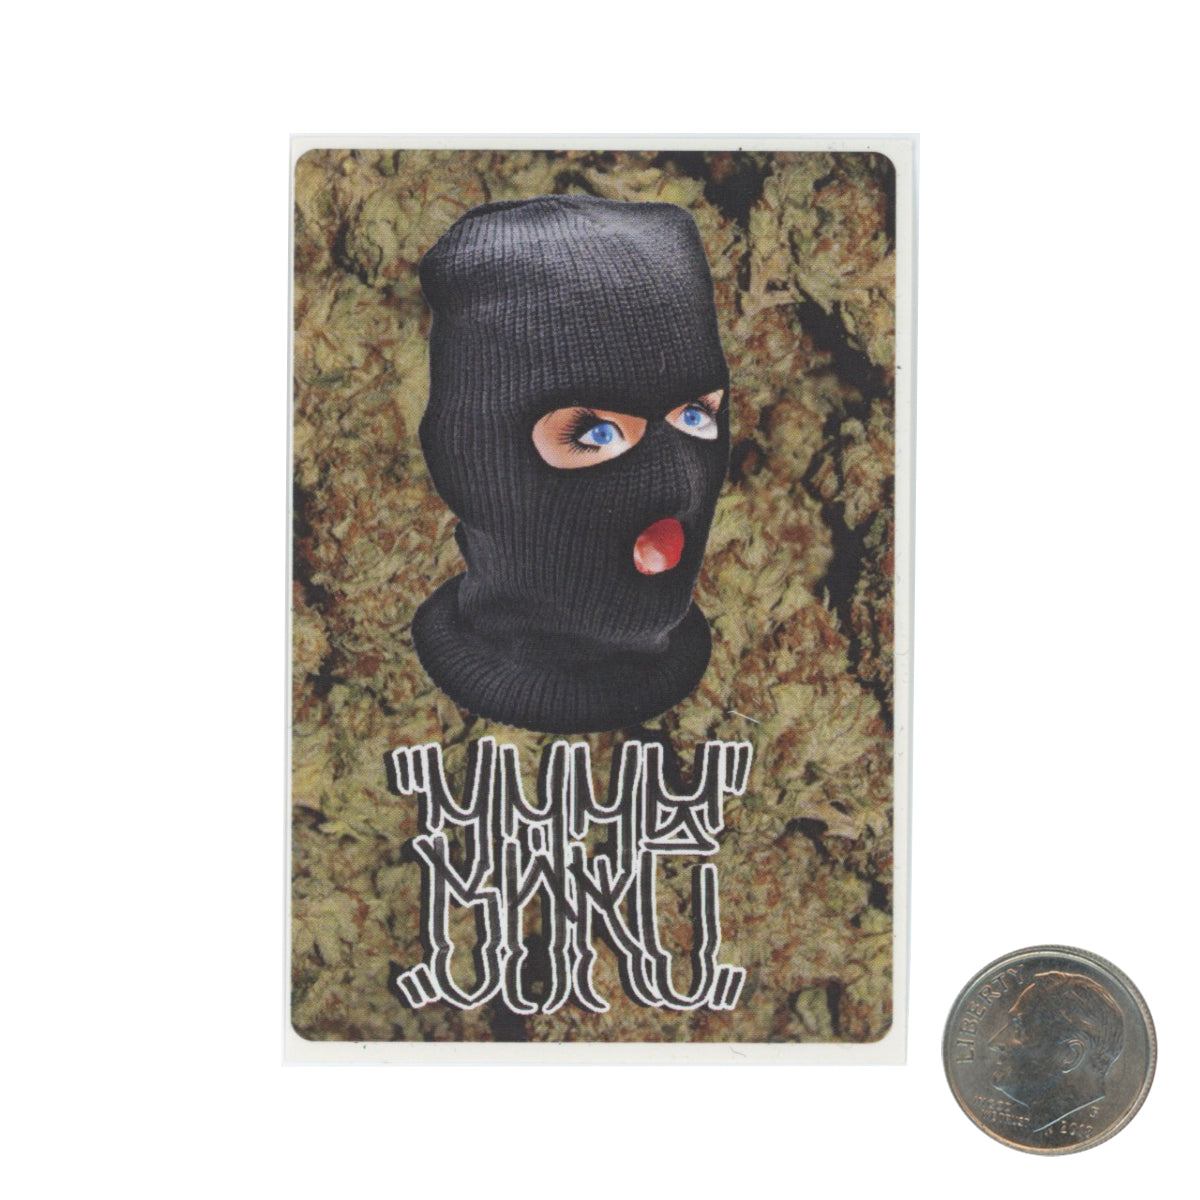 BareOne Girl in Mask and Cannabis Sticker with dime